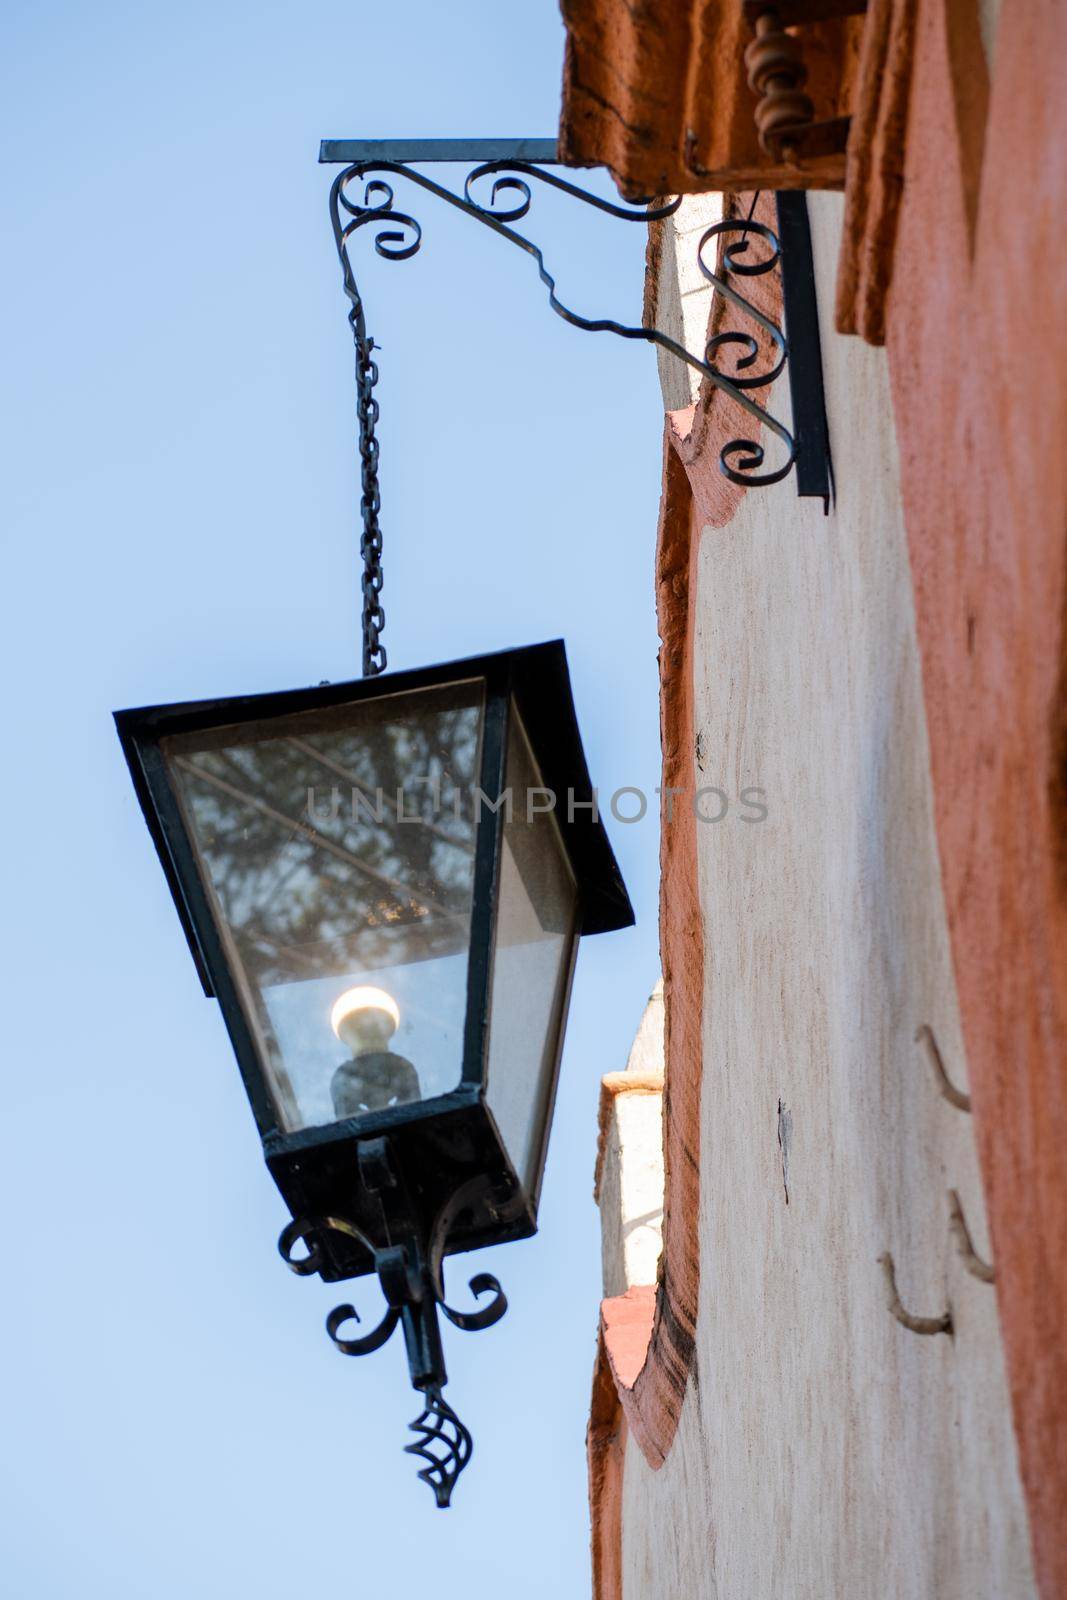 Classic metal and glass lantern hanging from old Hispanic building and under blue sky. Hanging lamp next to house with classic architecture in Mexico City. Traditional outdoors decoration